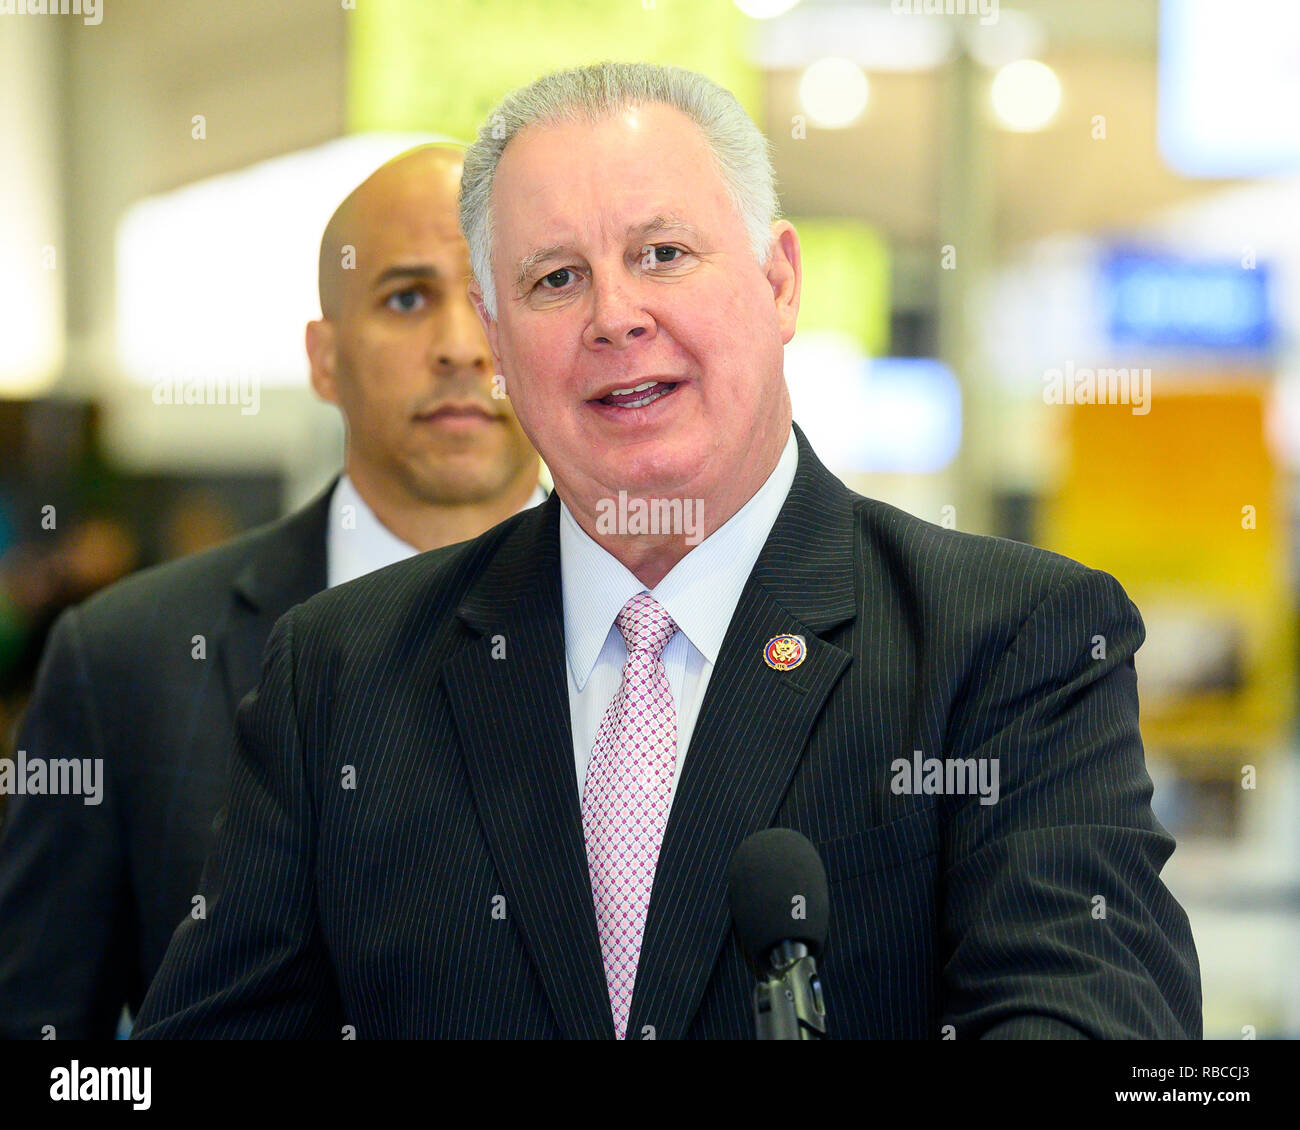 U.S. Representative Albio Sires (D-NJ) seen speaking at a news conference at Newark Liberty International Airport to demand an end to the partial government shutdown leaving thousands of federal workers in New Jersey without pay and to highlight the impacts of lost services being felt statewide. At Newark Liberty International Airport in Newark, New Jersey. Stock Photo